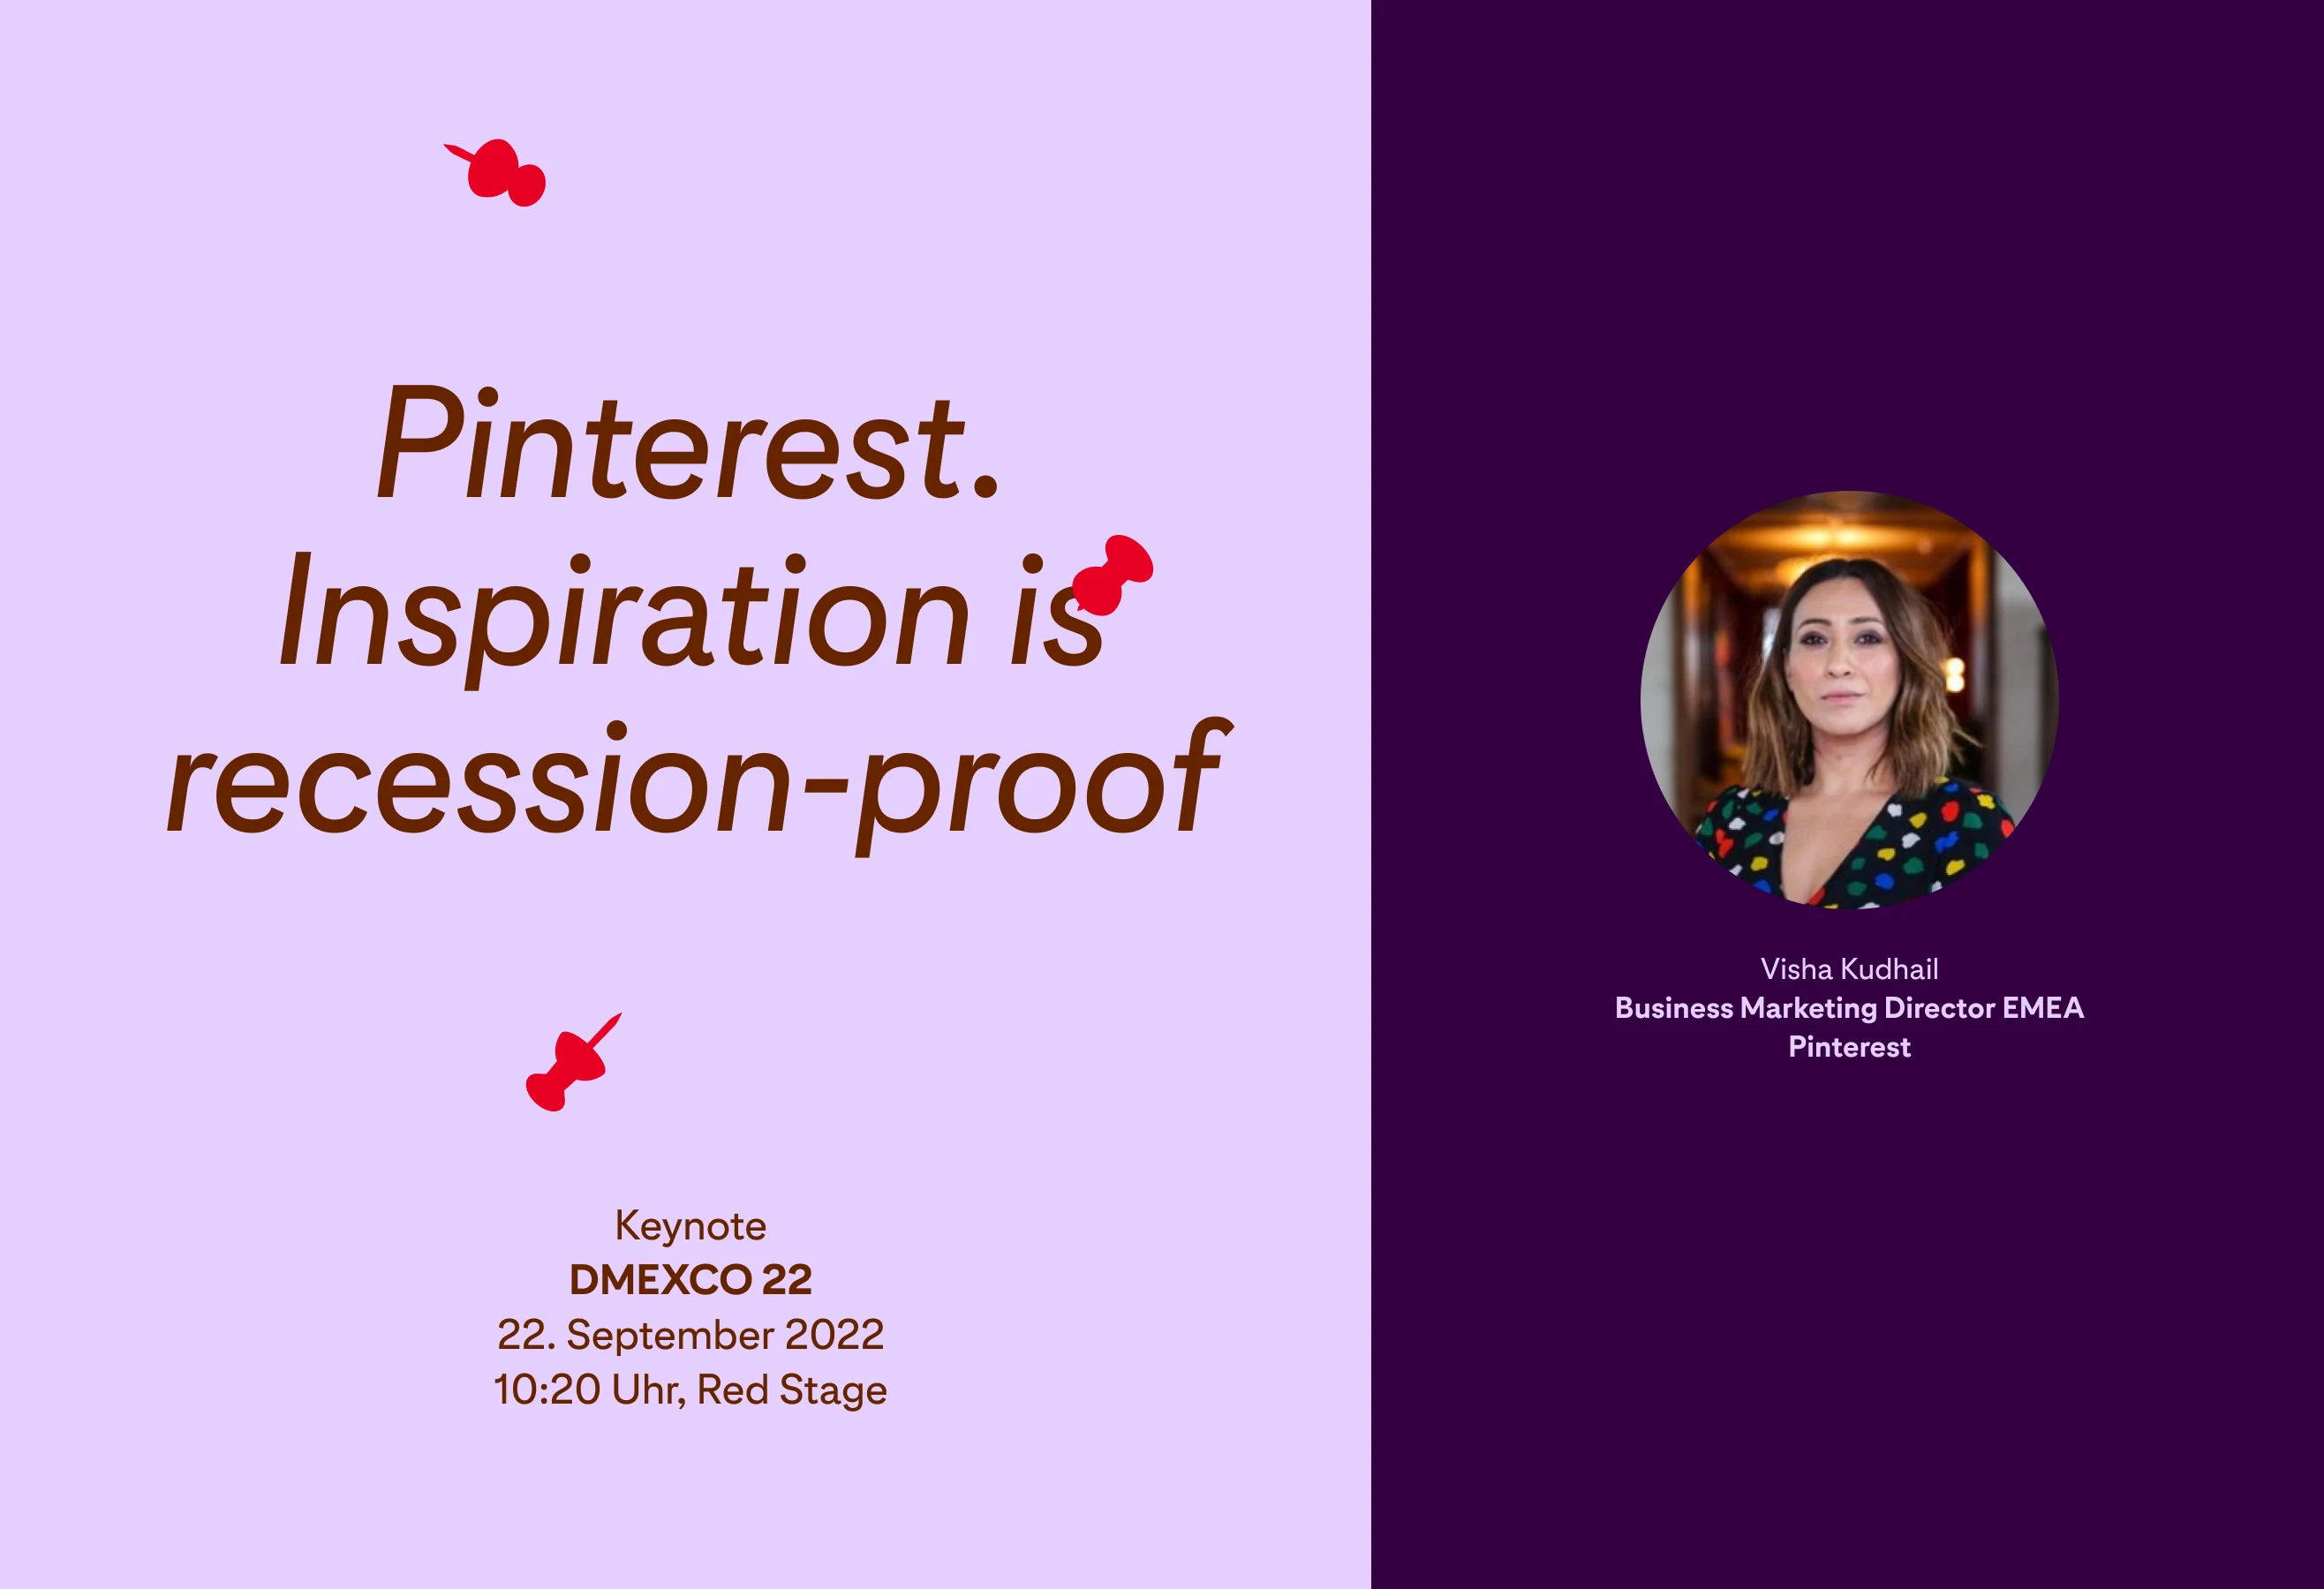 Image advertising the Pinterest at DMEXCO 2022 presentation, titled "Inspiration is recession-proof with Visha Kudhail"